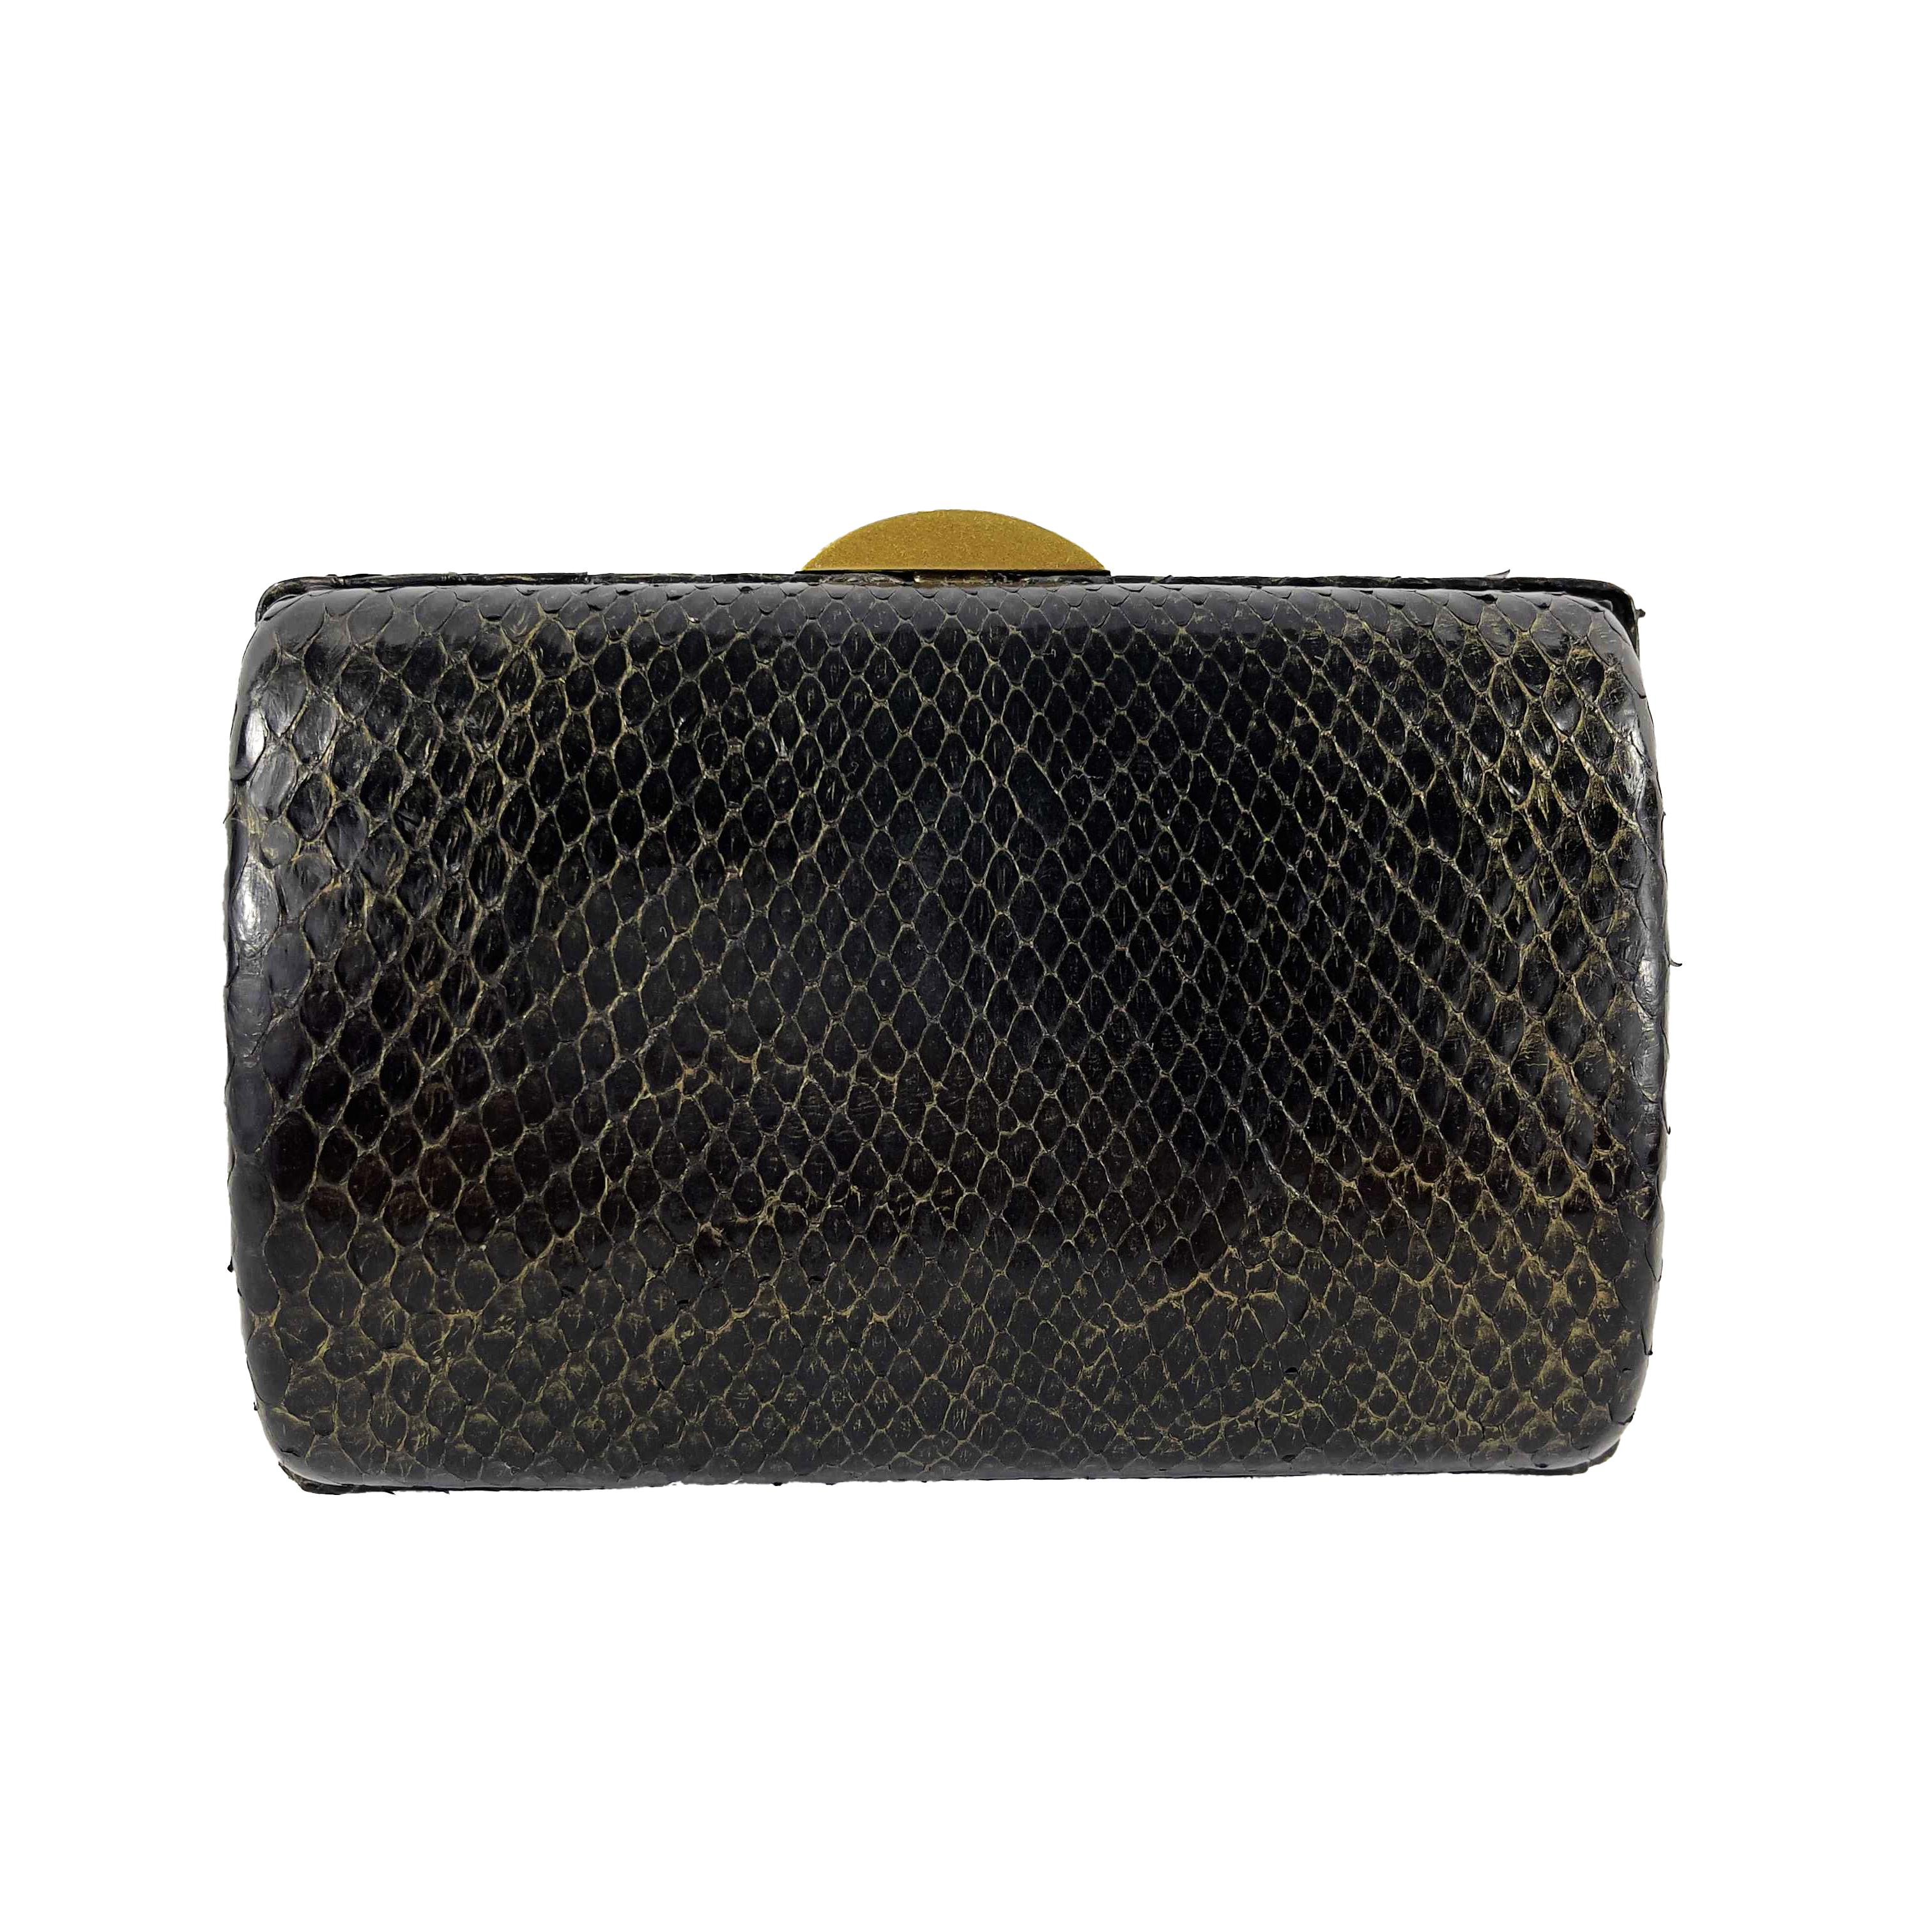 CHANEL - VINTAGE 1990S SNAKESKIN CROSSBODY MINAUDIERE CLUTCH - STAMPED CLOSURE

DESCRIPTION

Vintage 1990s
The black snakeskin exterior has a golden sheen, top lock in antiqued gold tone metal stamped CHANEL.
Gold leather interior lining with one